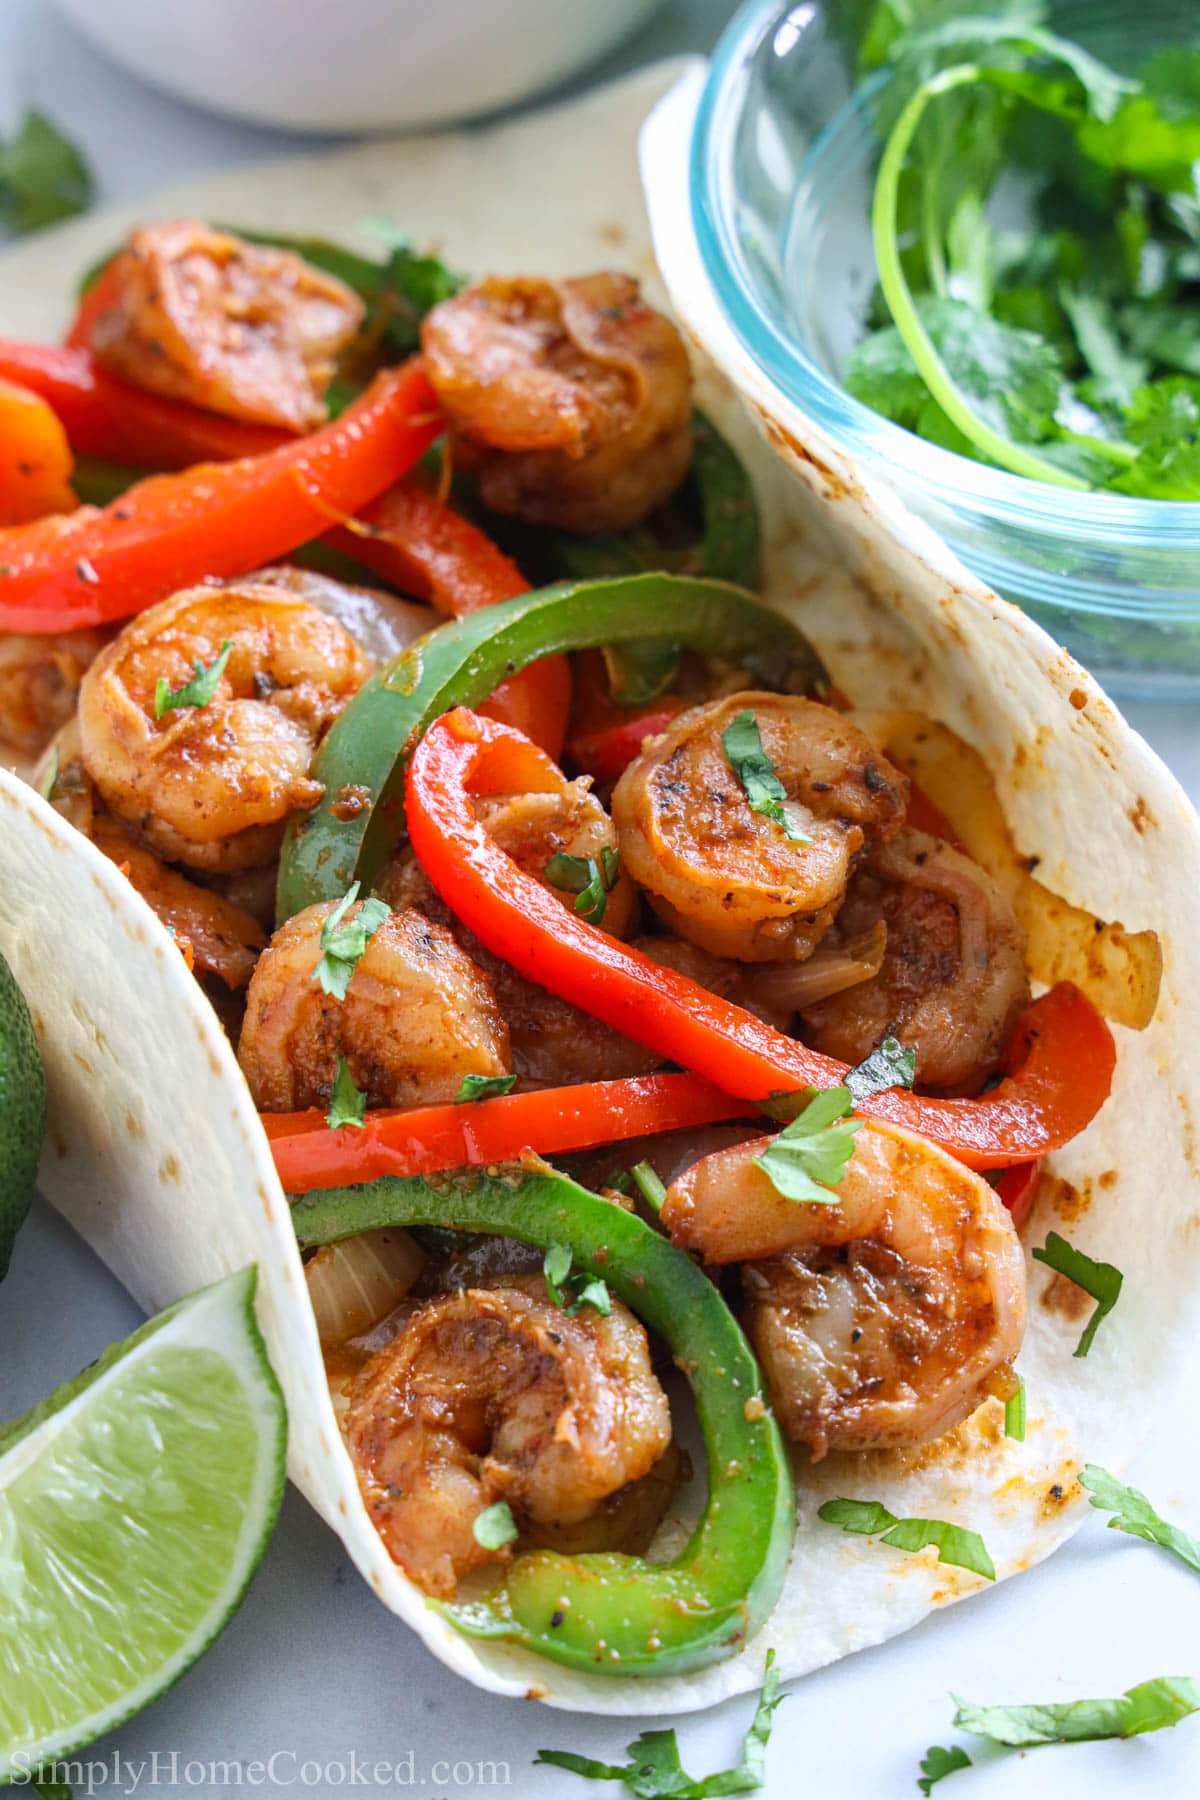 Vertical close up of Shrimp Fajitas in a flour tortilla, cilantro and a lime wedge on the side.